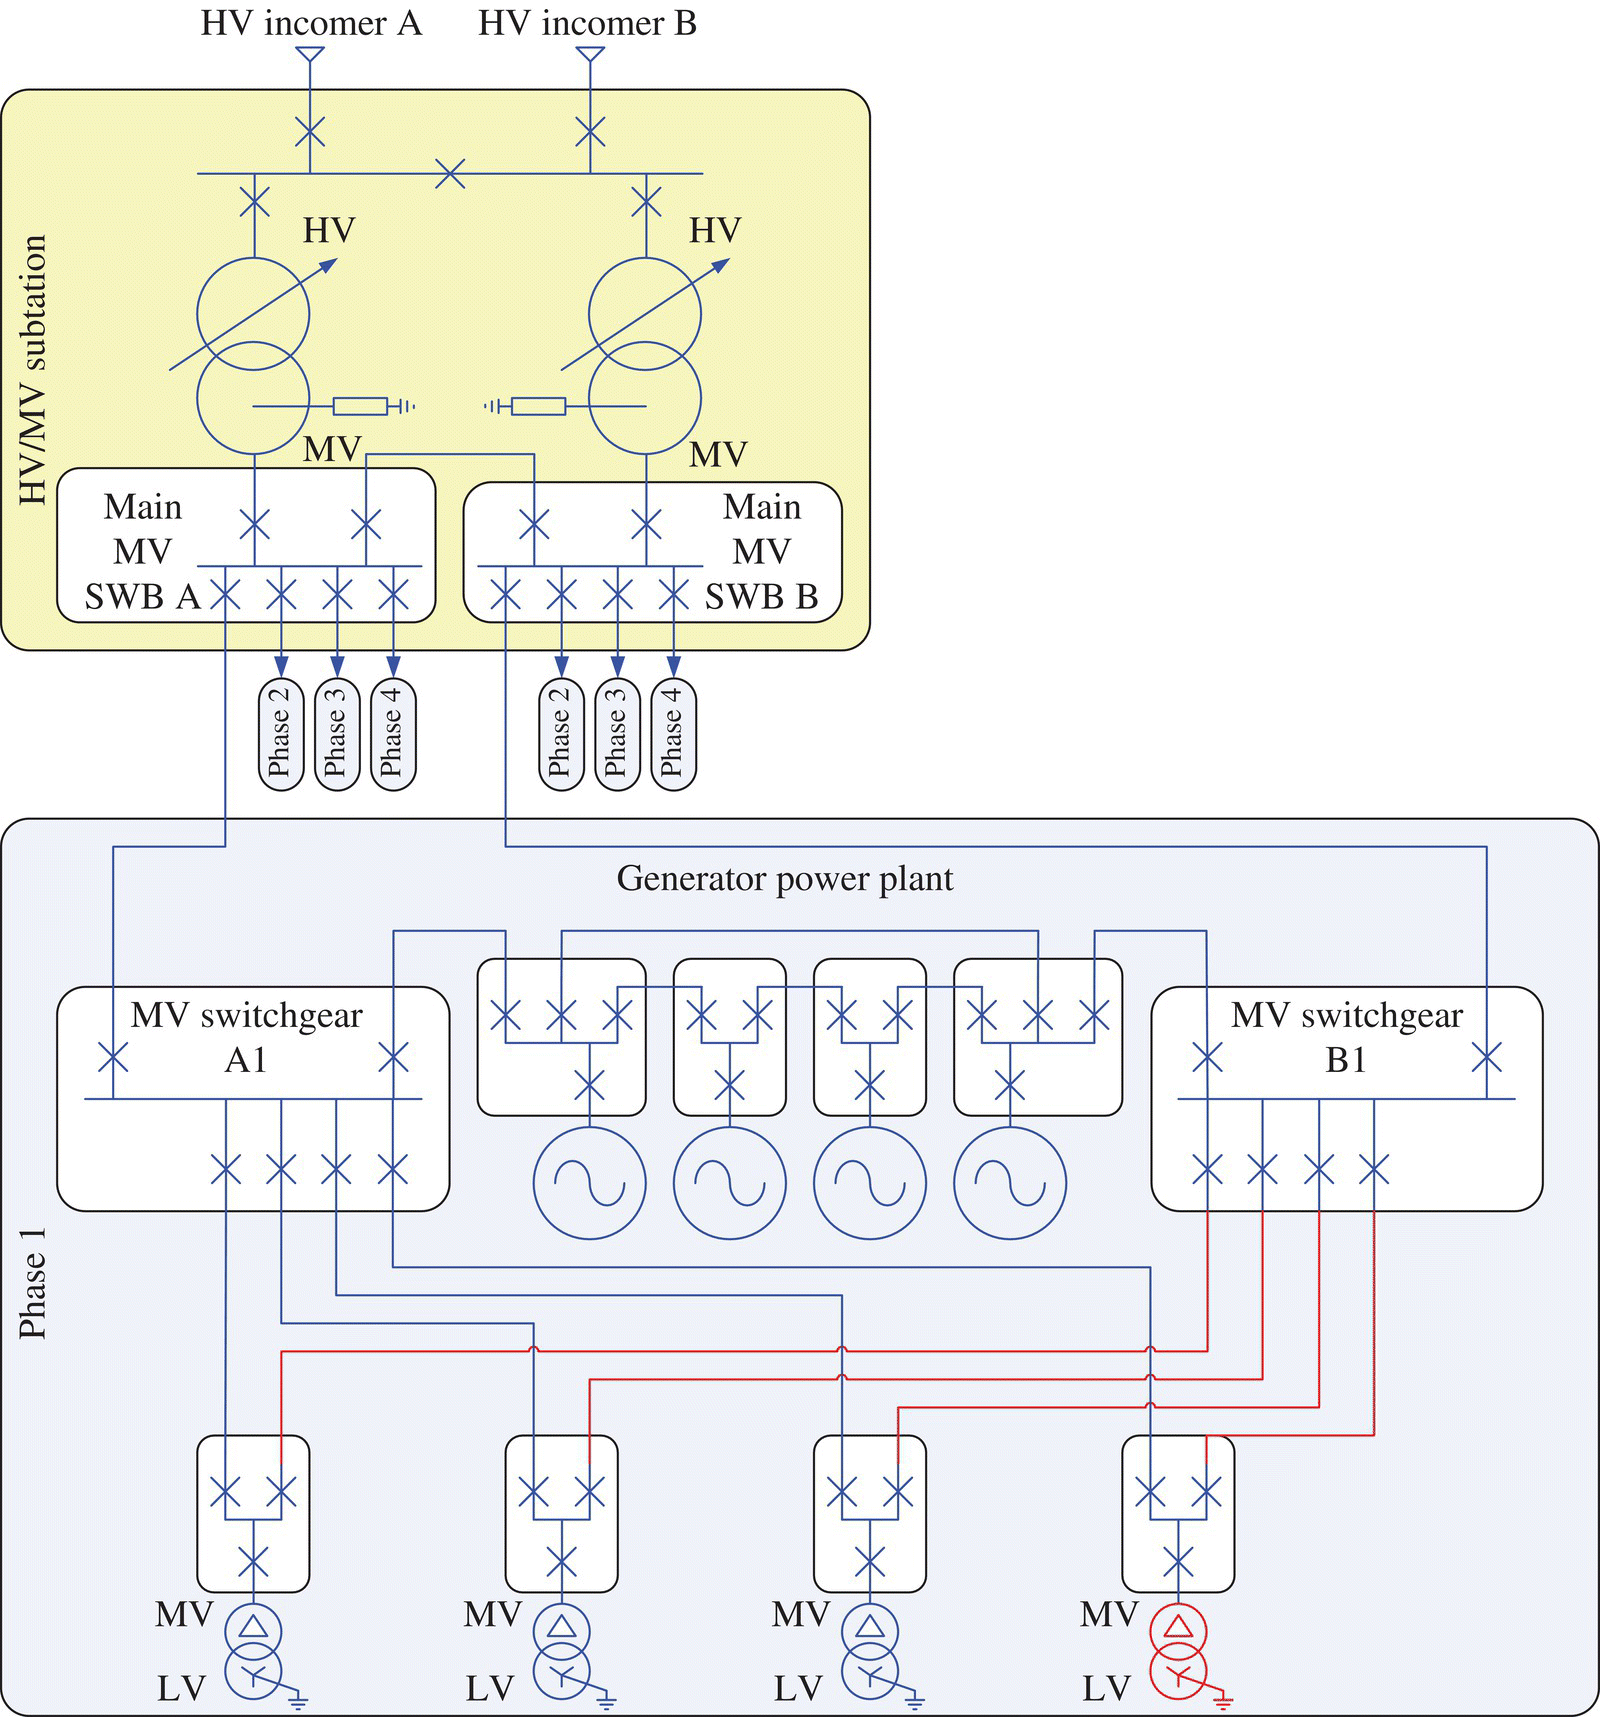 Schematic illustration of an example of a large data center MV power system.